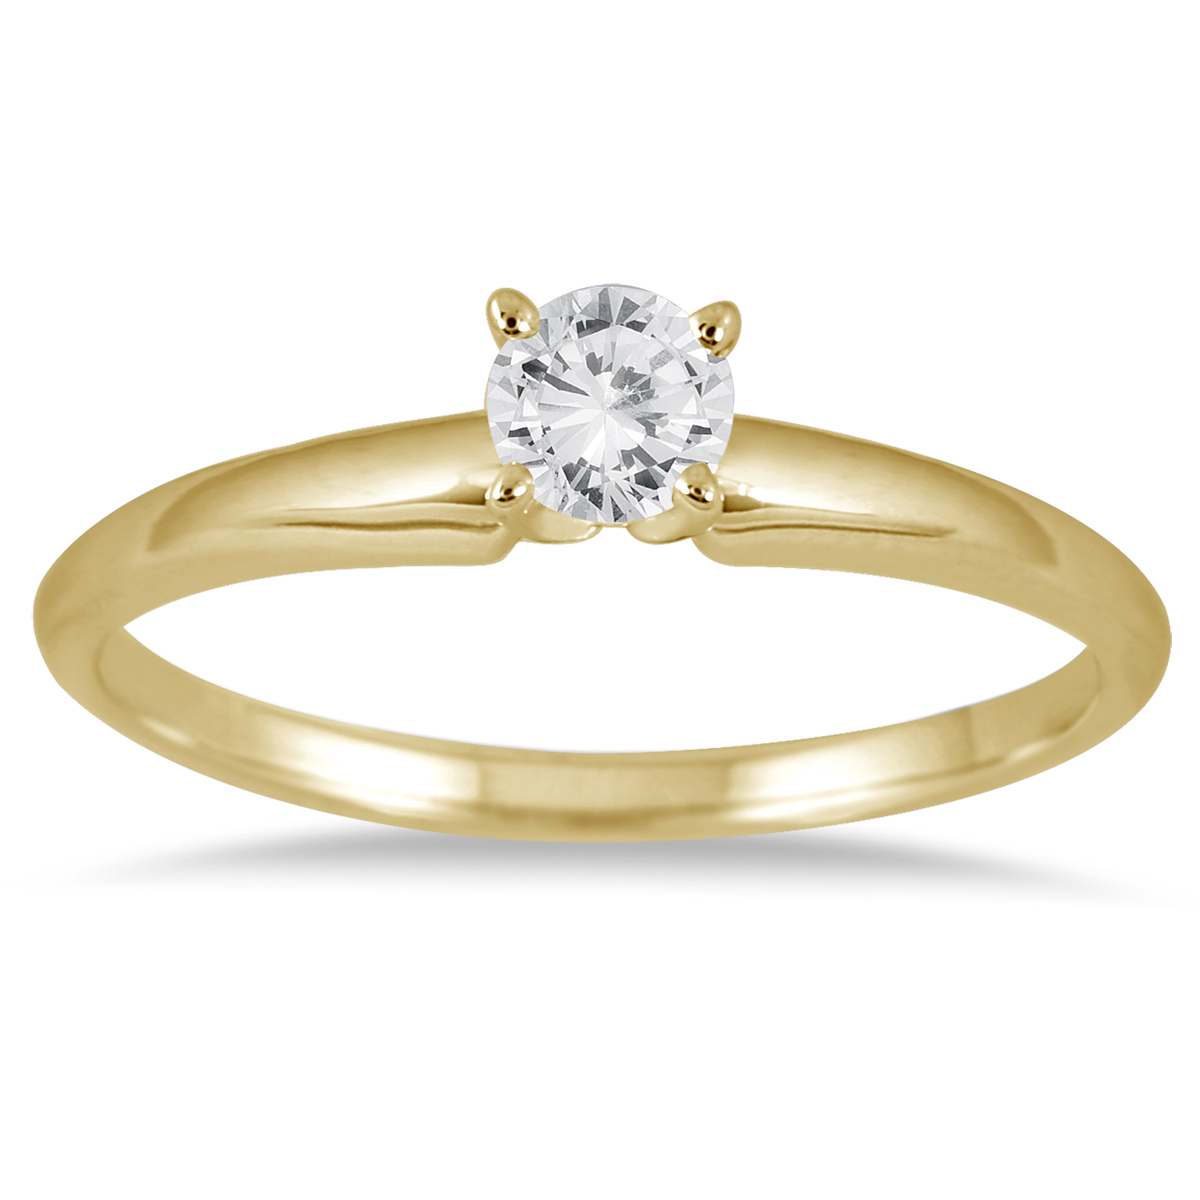 1/10 Carat Round Diamond Solitaire Ring in 14K Yellow Gold